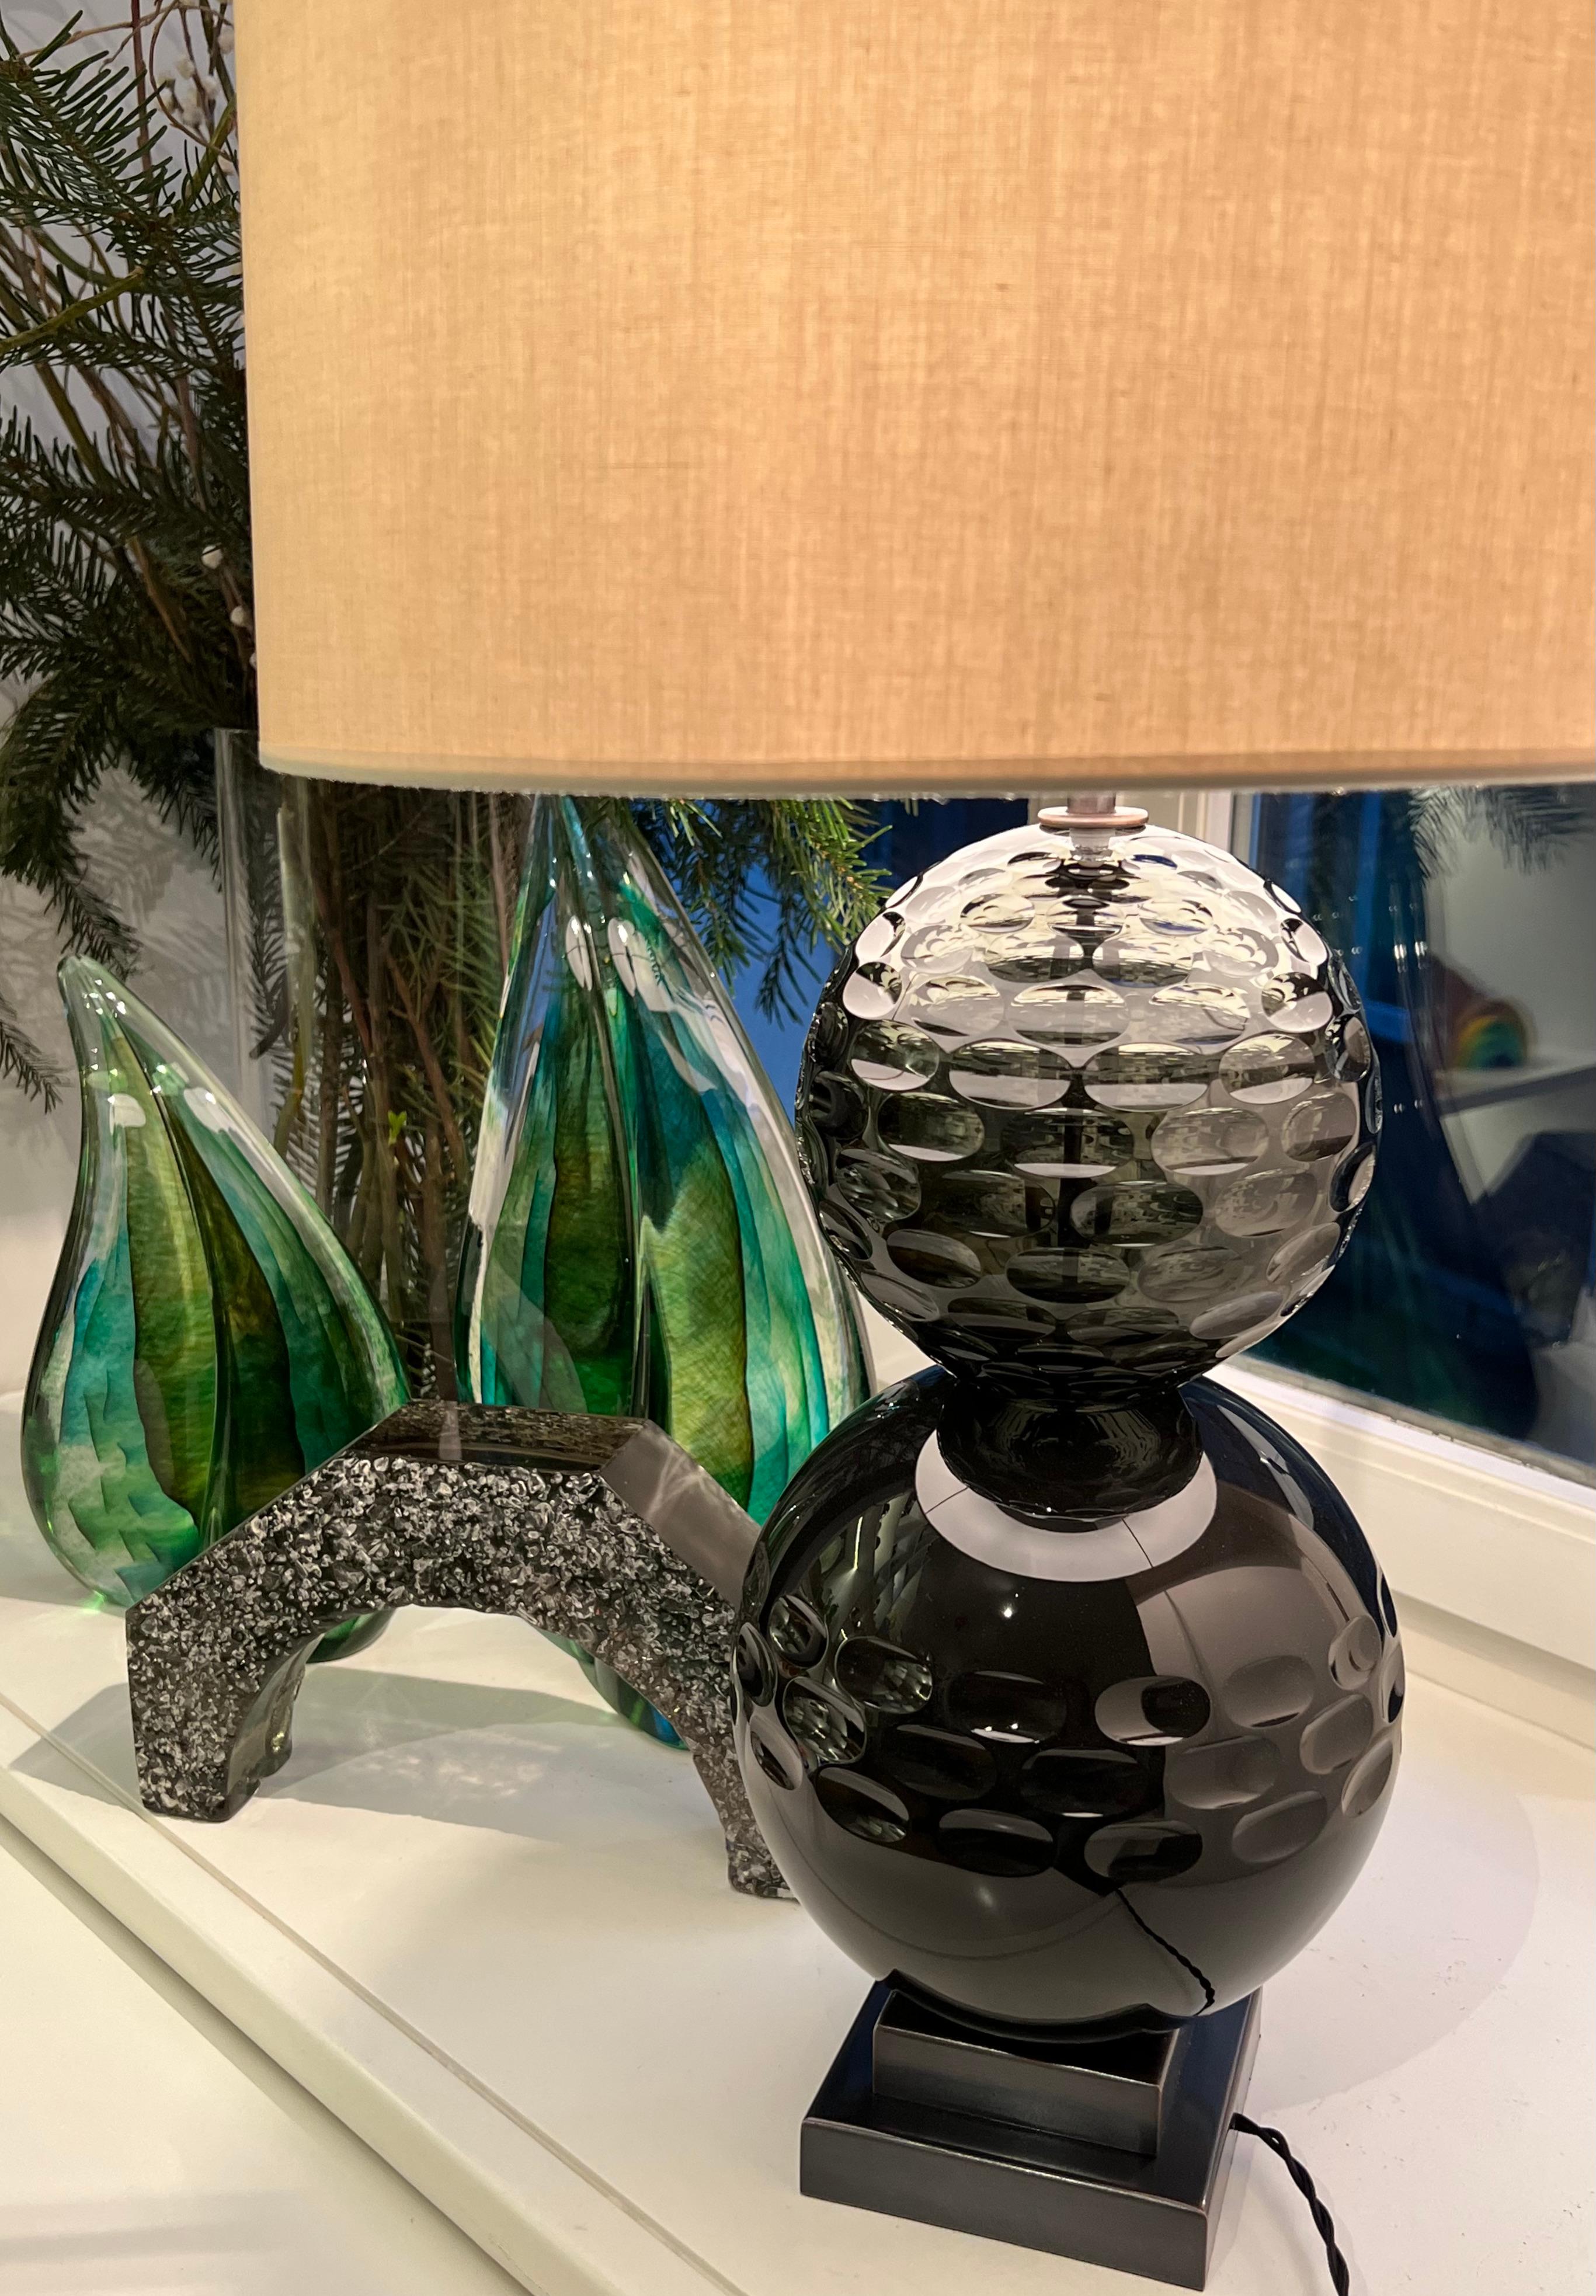 The mouth blown and hand carved striking olive and amethyst glass globes are mouth blown and hand carved. The glass globes are about 20 cm and 16 cm in diameters and becomes the focal point in any interior. The metal base, woven electric cord and